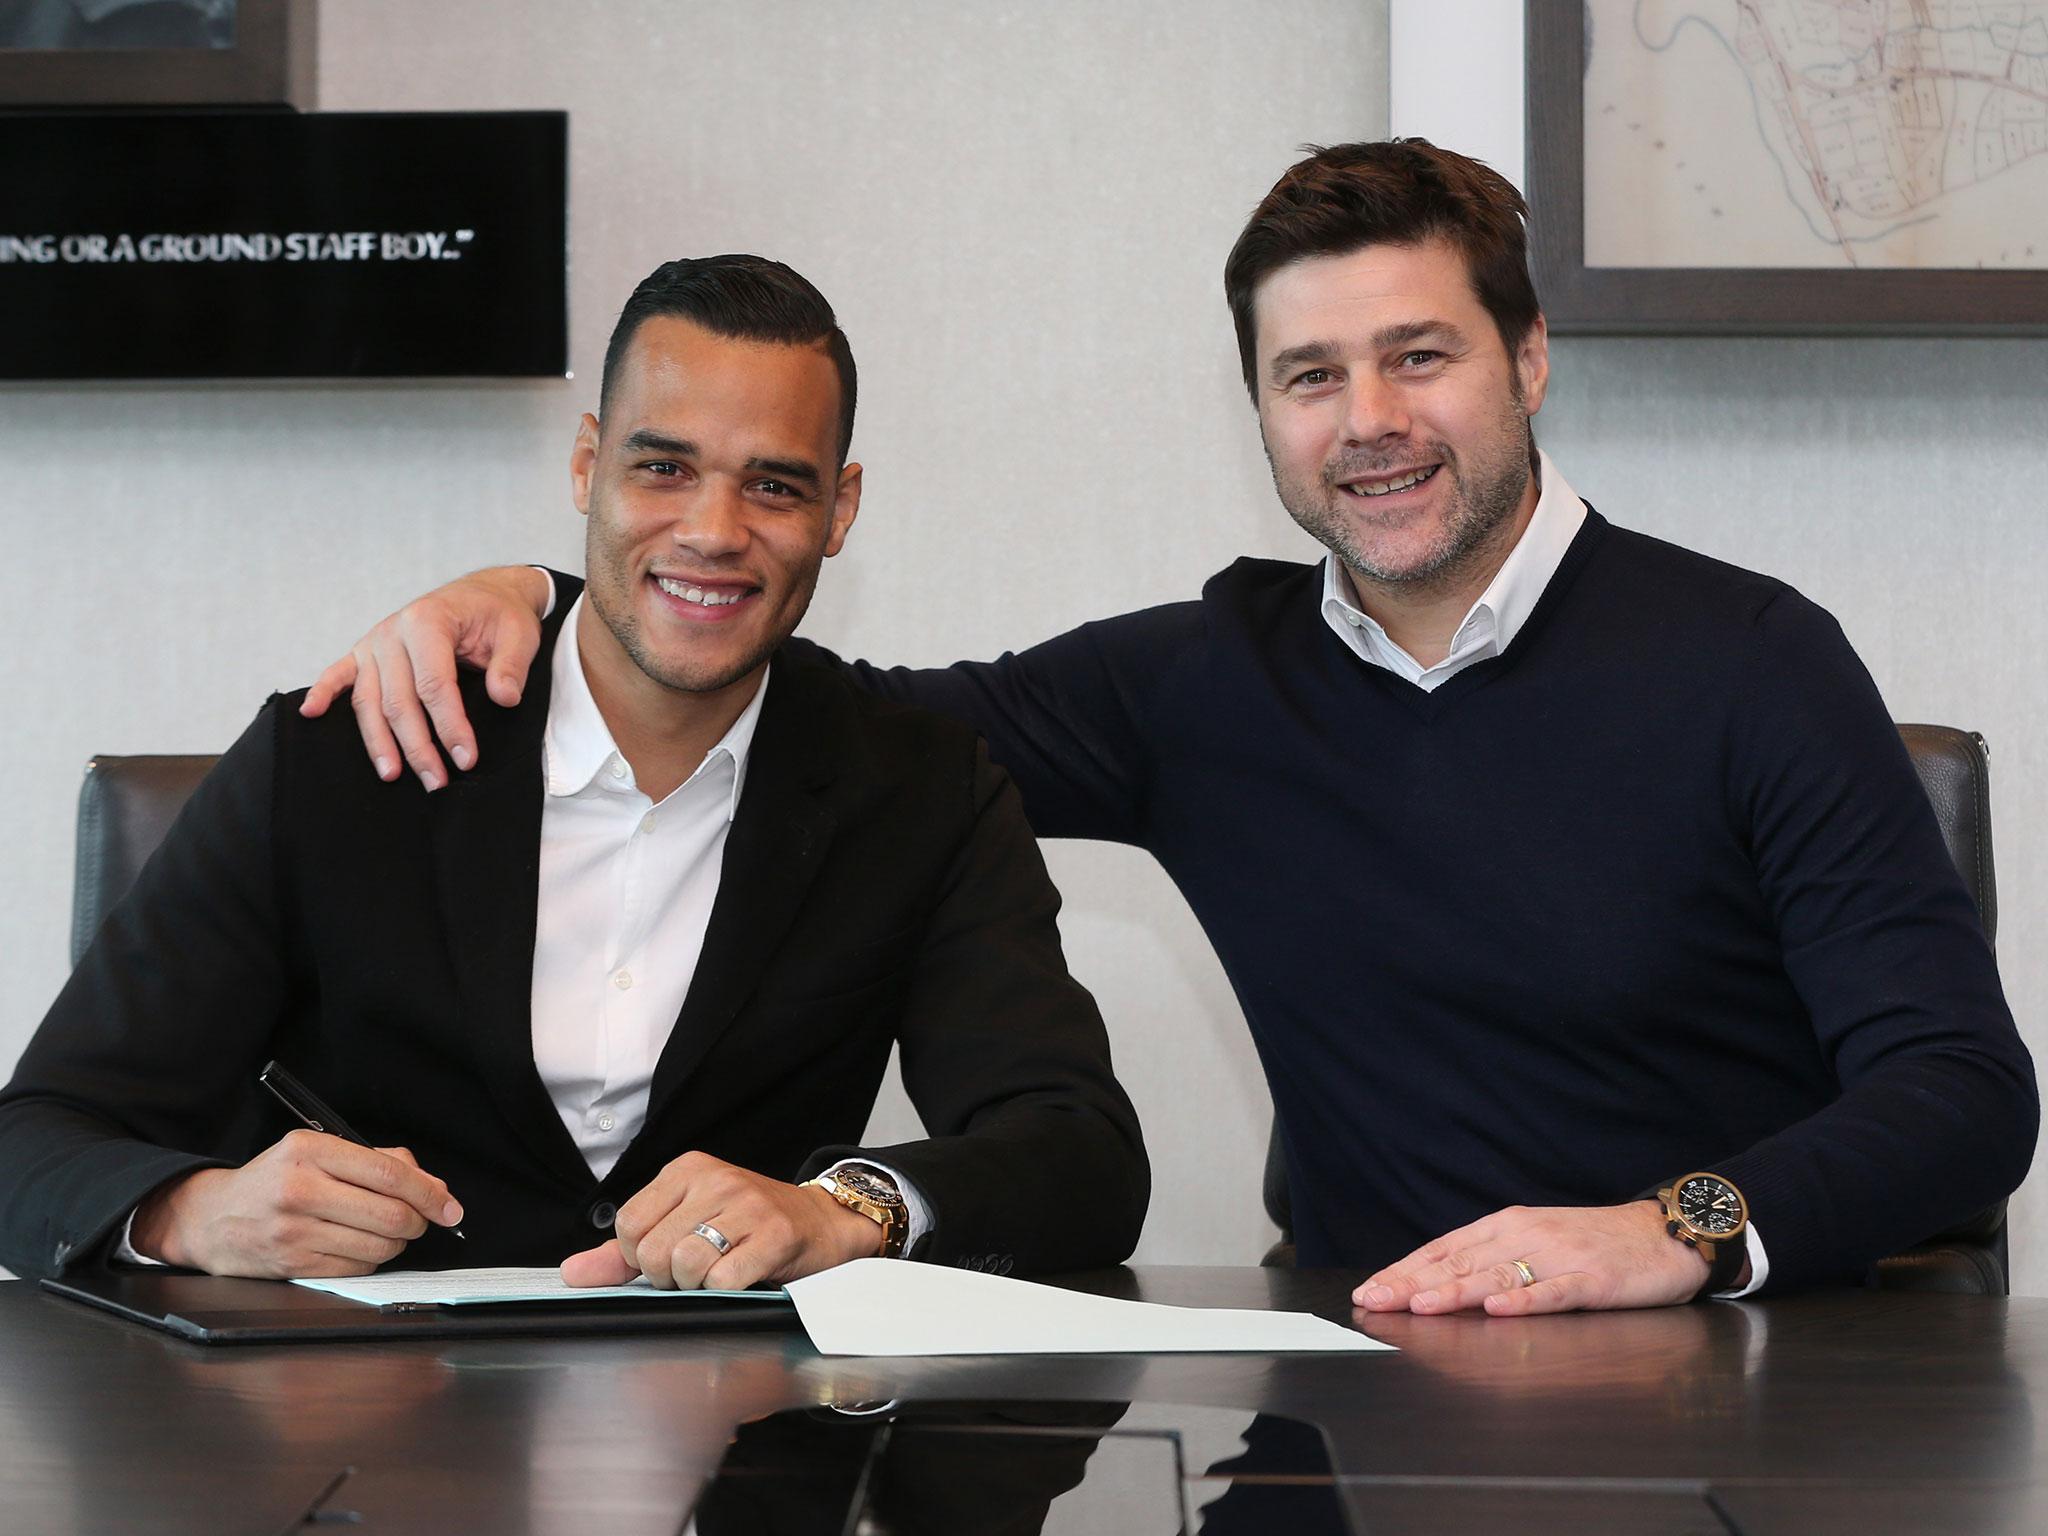 Michel Vorm has signed a new deal that runs until 2018 with Mauricio Pochettino's Tottenham